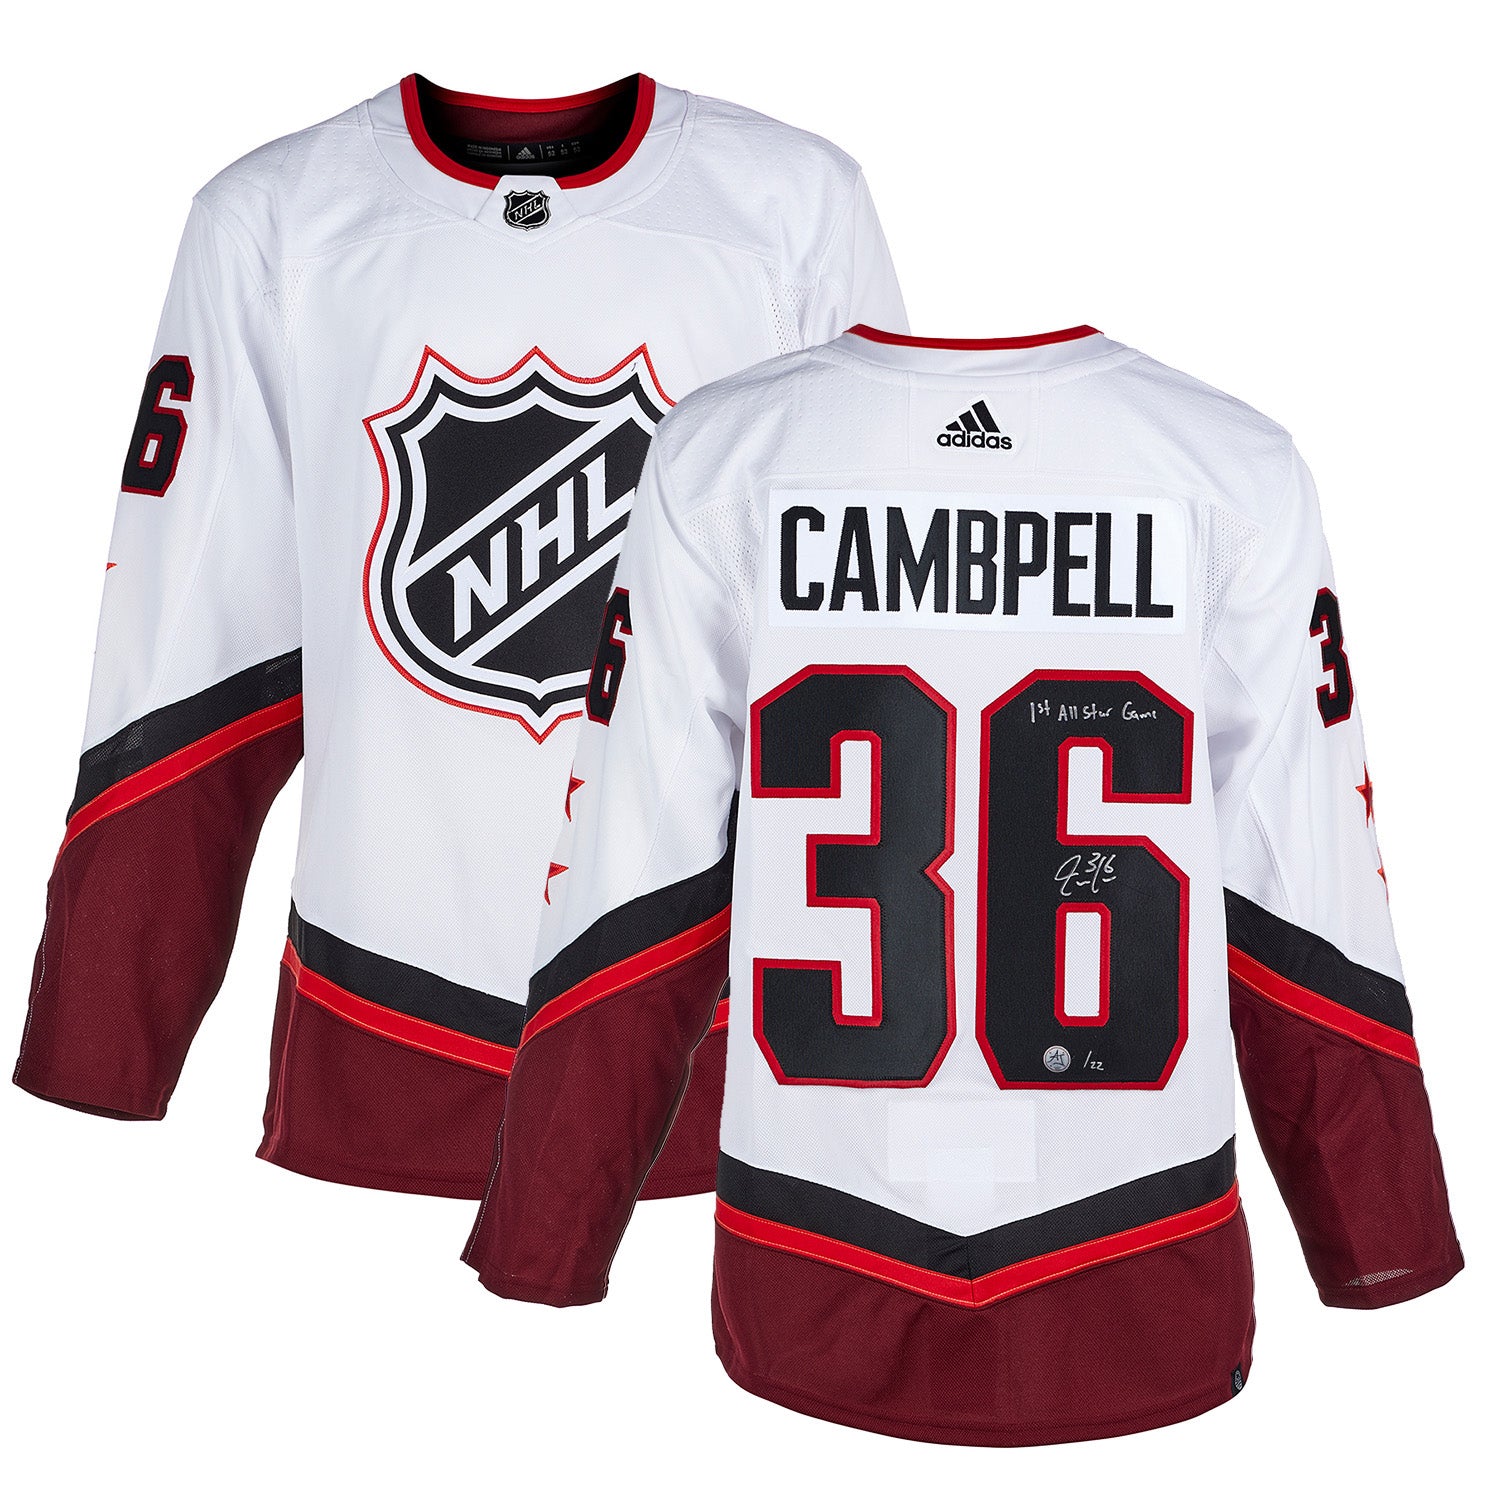 Jack Campbell 2022 NHL All-Star Adidas Pro Autographed Jersey - NHL Auctions